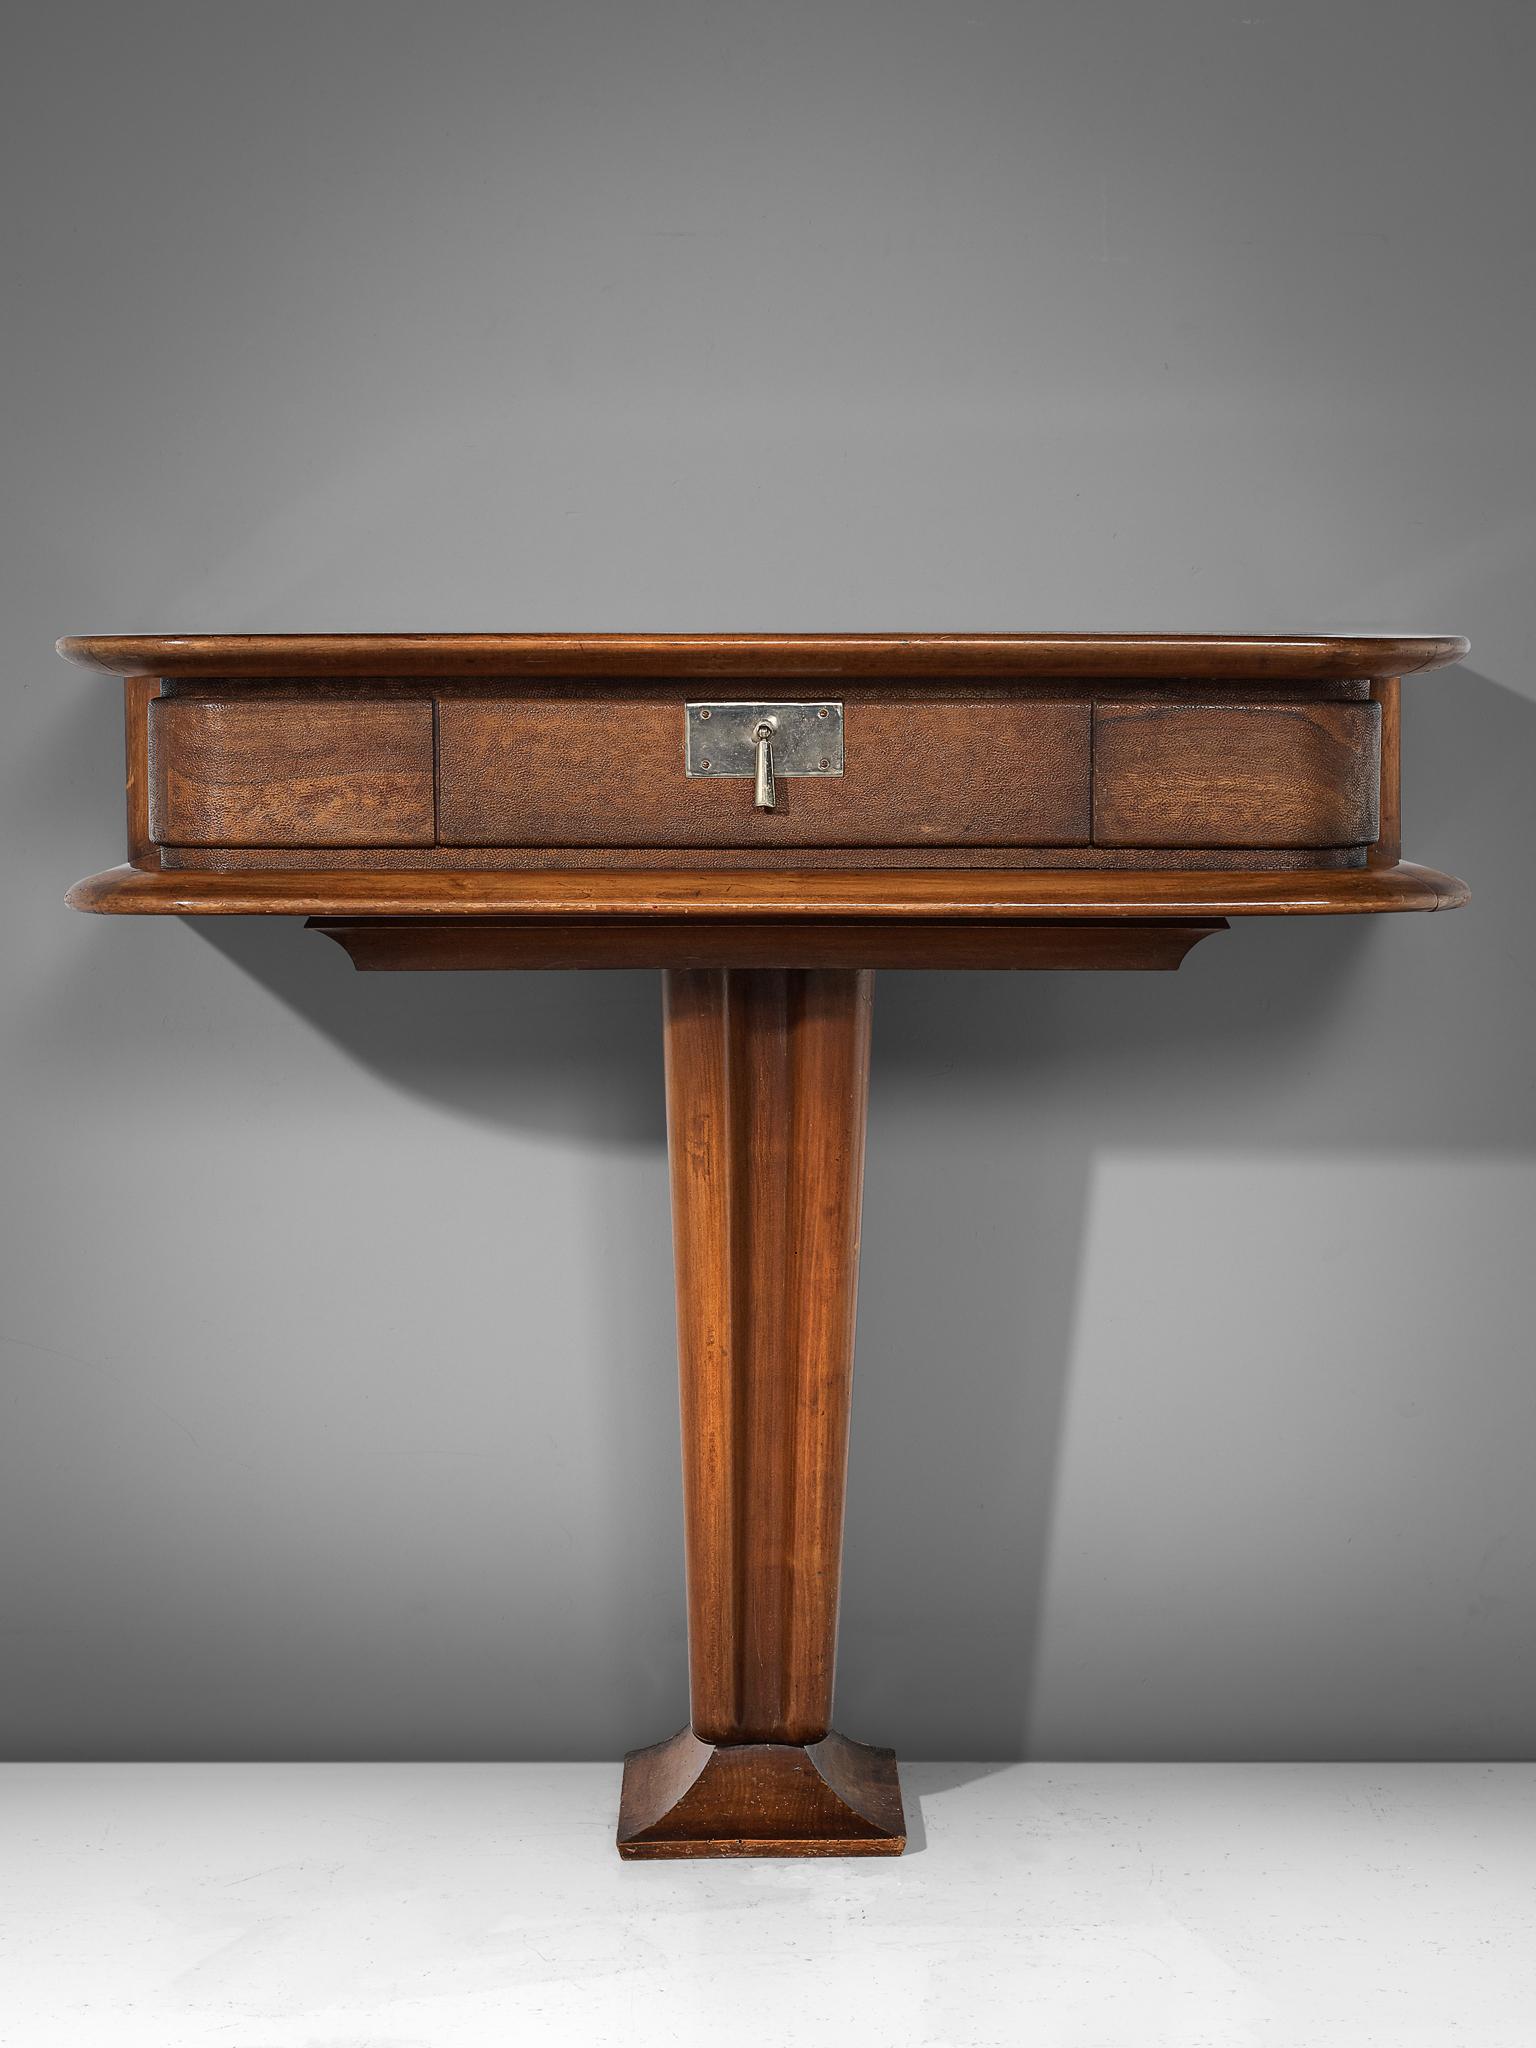 Vittorio Valabrega, console, walnut and leather, Italy, 1940s

This console by the Italian artist and designer Vittorio Valabrega is sculptural and elegant. The walnut storage case rests on a pedestal foot and the piece is inlayed with leather at